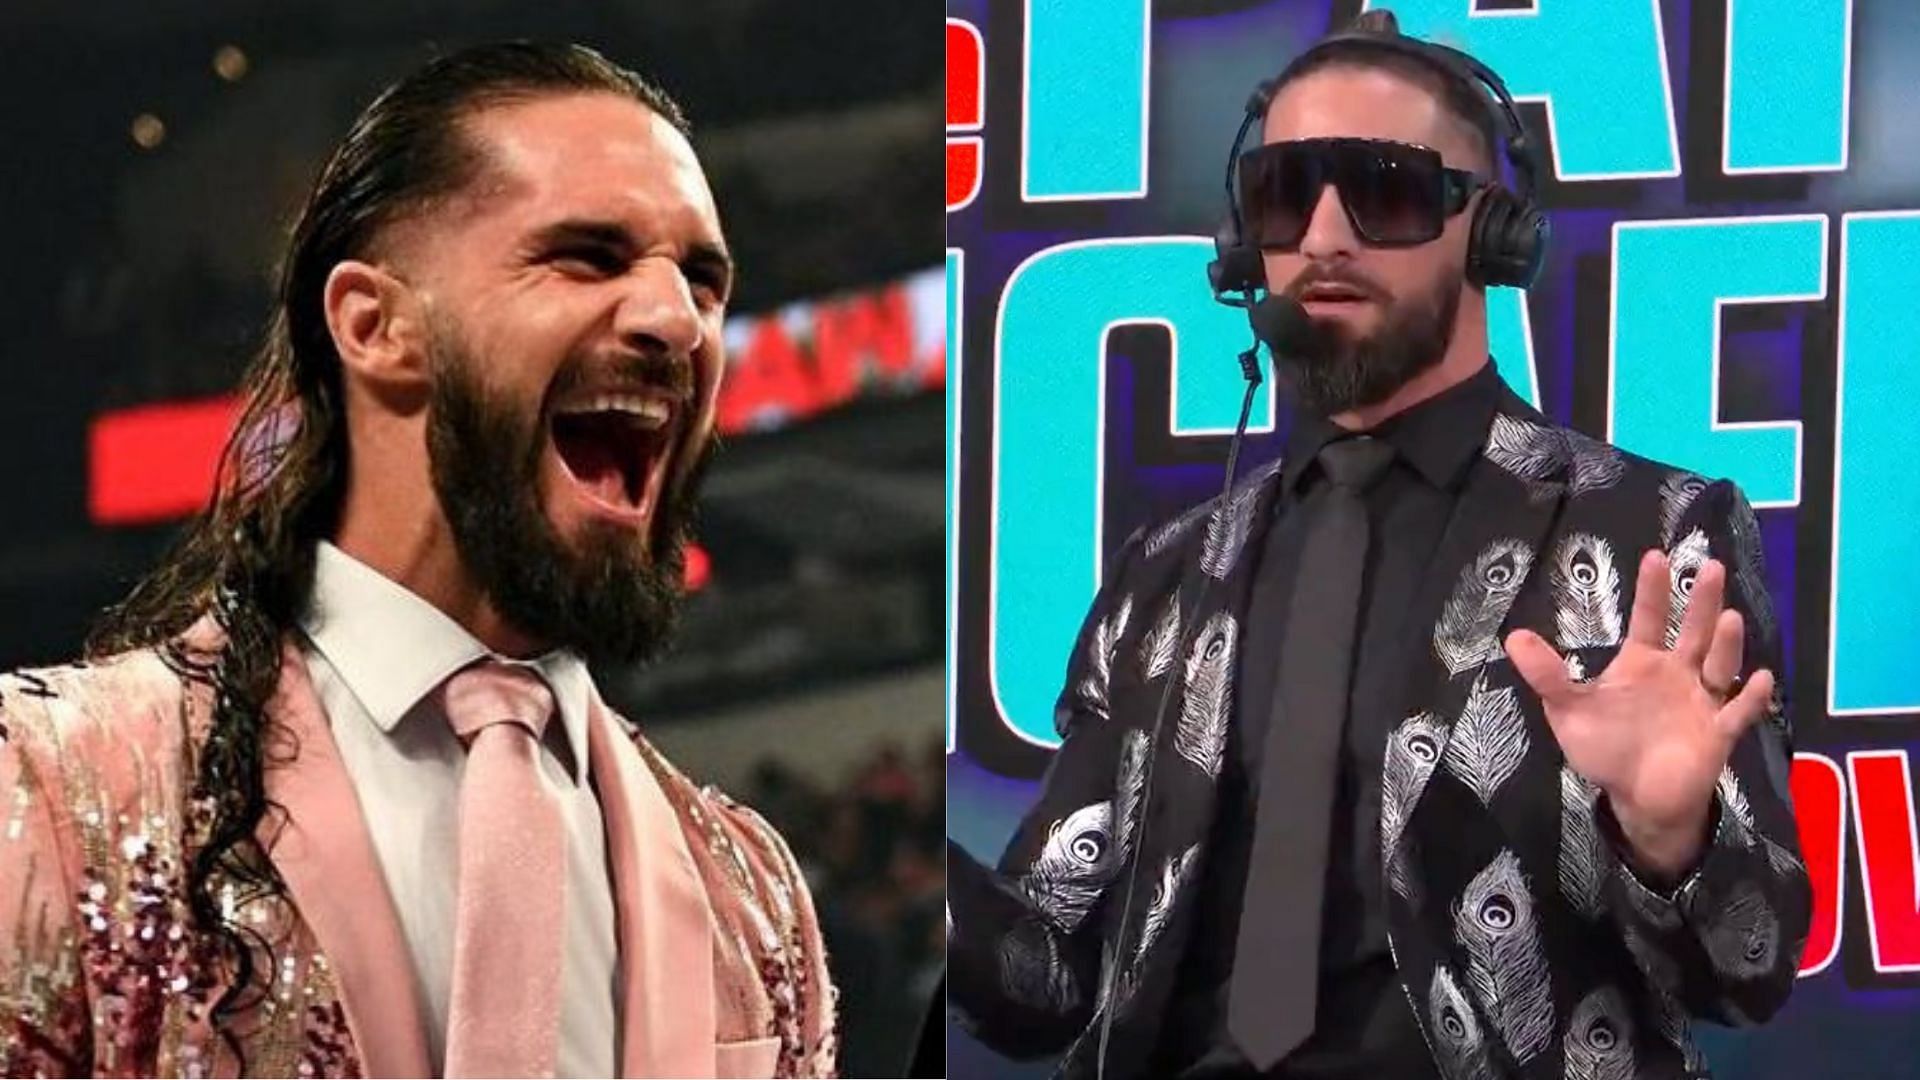 Seth Rollins has an issue with a WWE Superstar after the Royal Rumble.